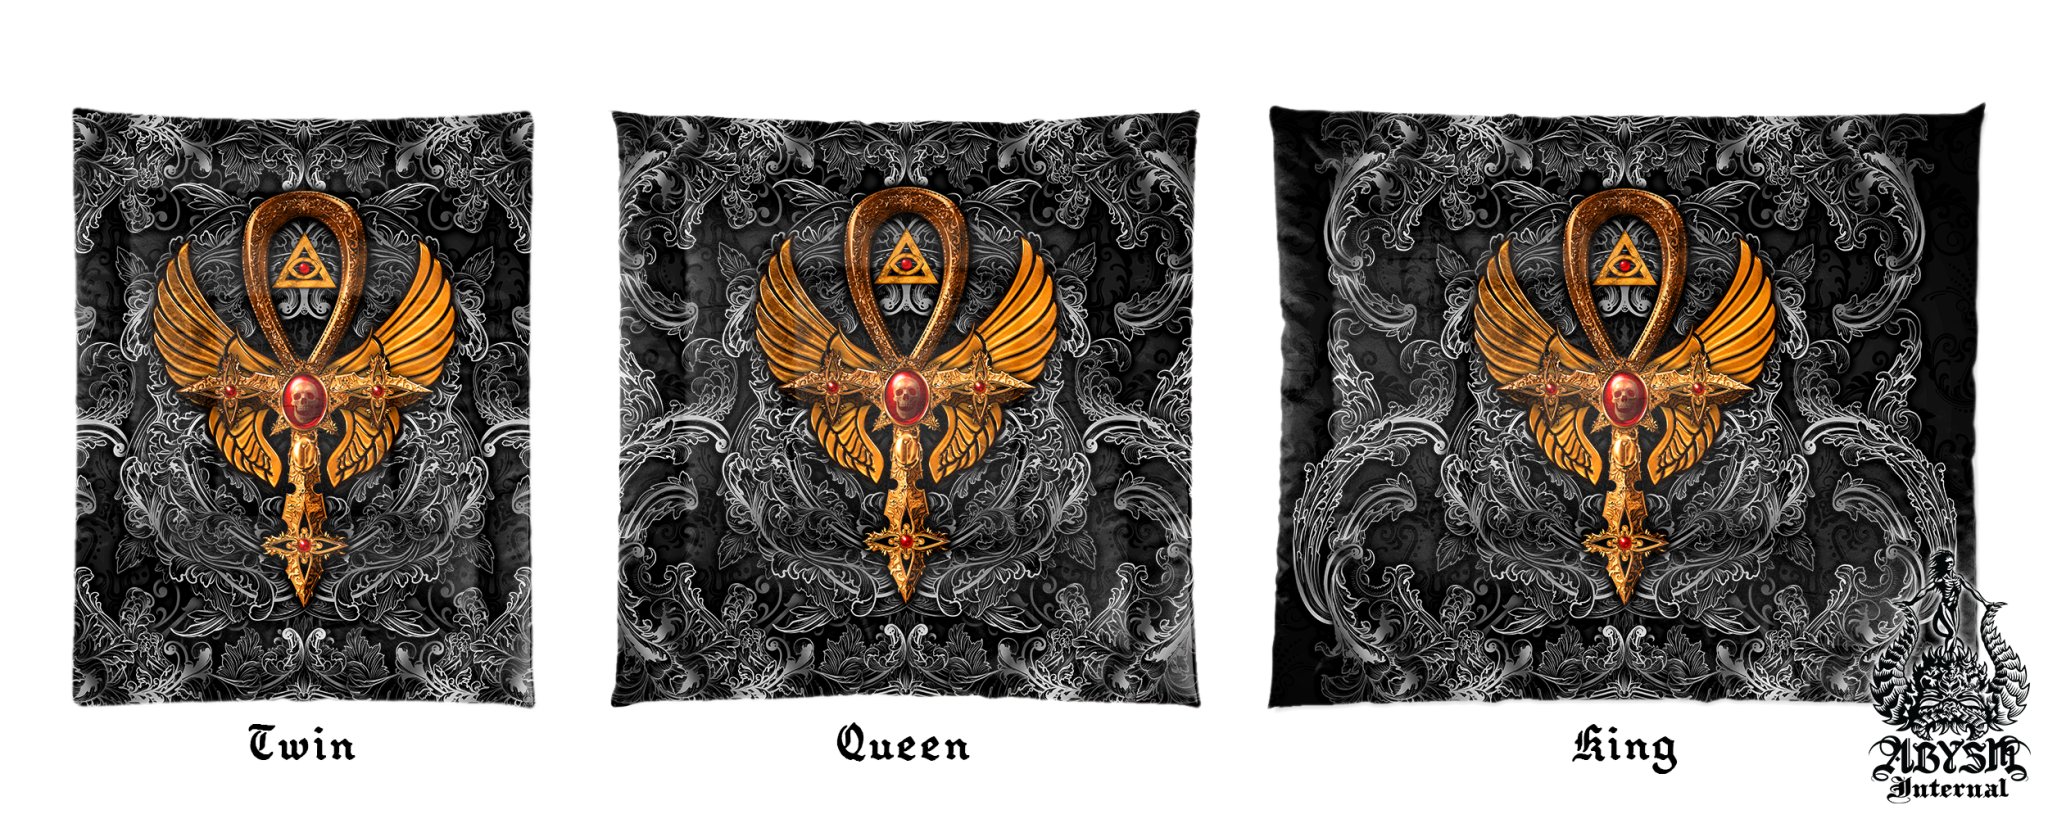 Gothic Comforter or Duvet, Dark Ankh Bed Cover, Goth Bedroom Decor, King, Queen & Twin Bedding Set - Black with Red, Gold or White, 3 Colors - Abysm Internal